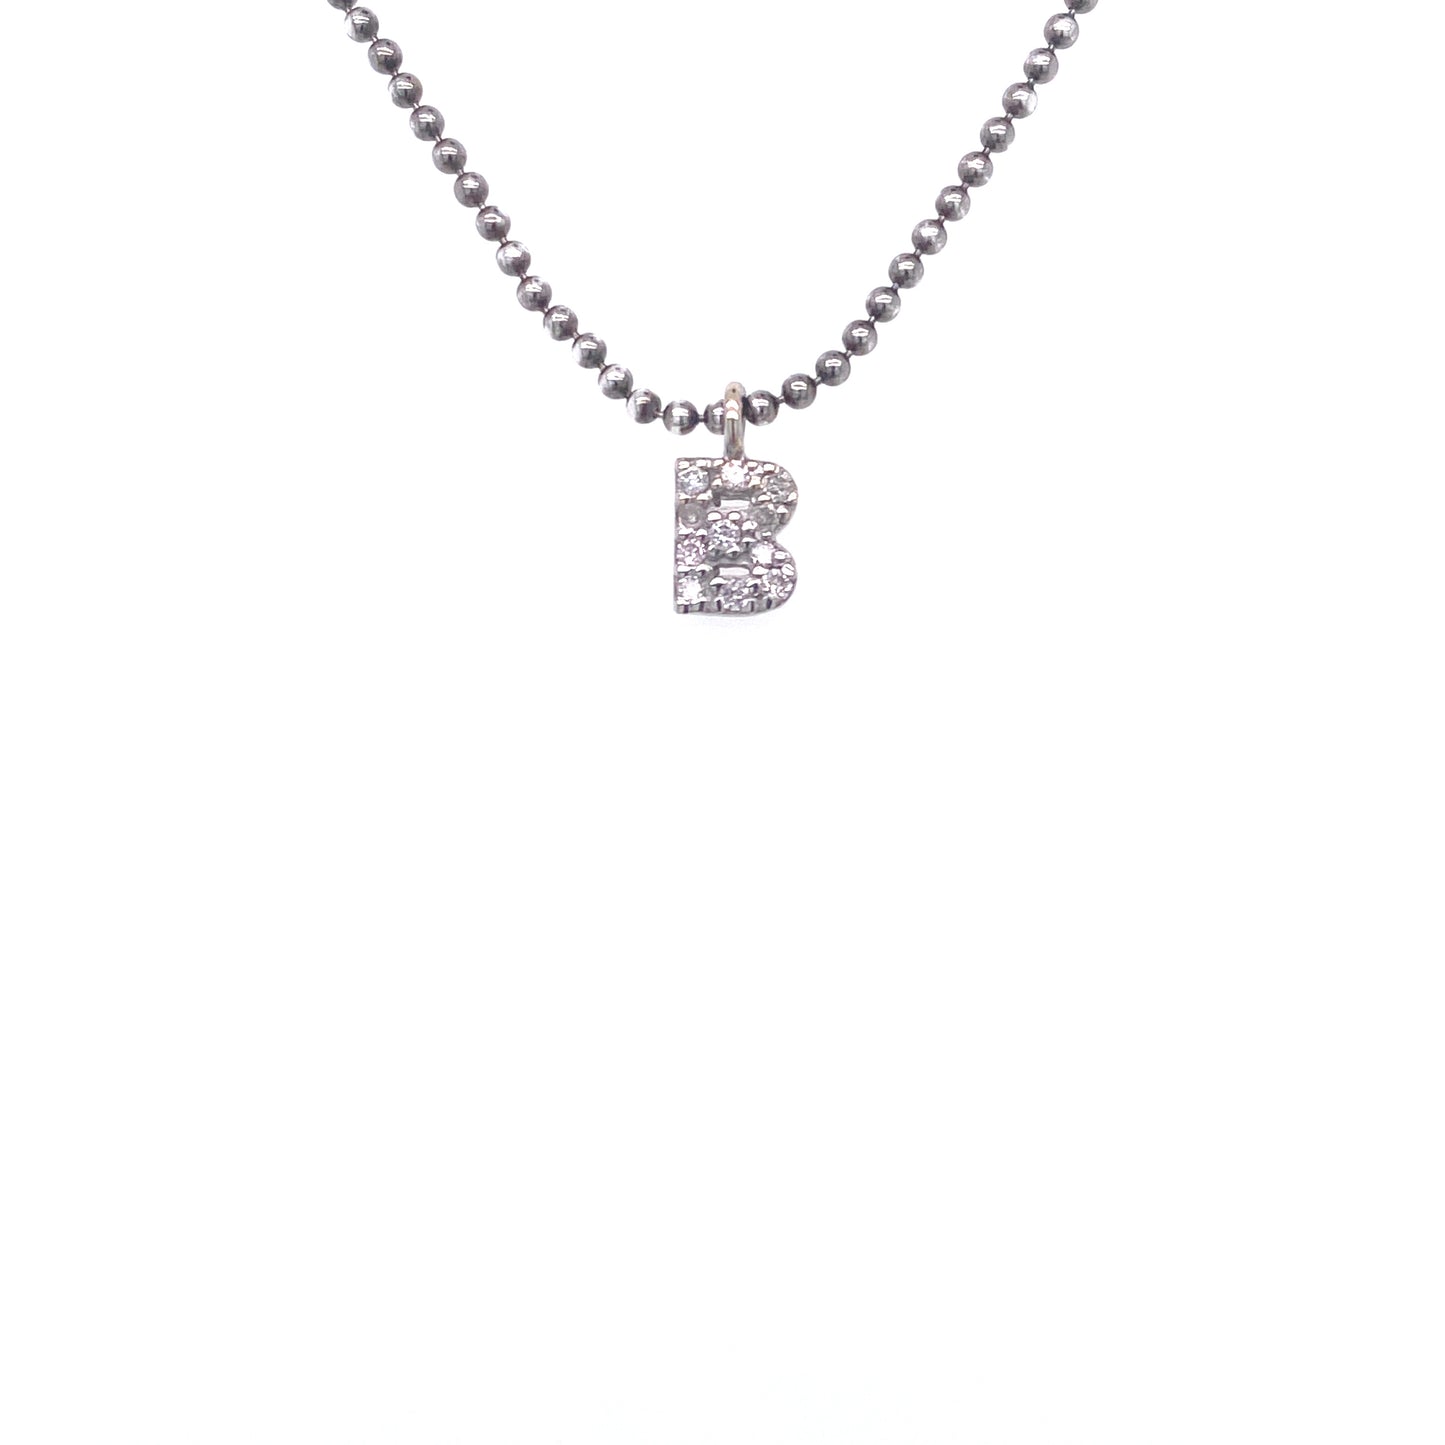 Necklace With Small Initial B and Diamond | Bernat Rubi | Luby 